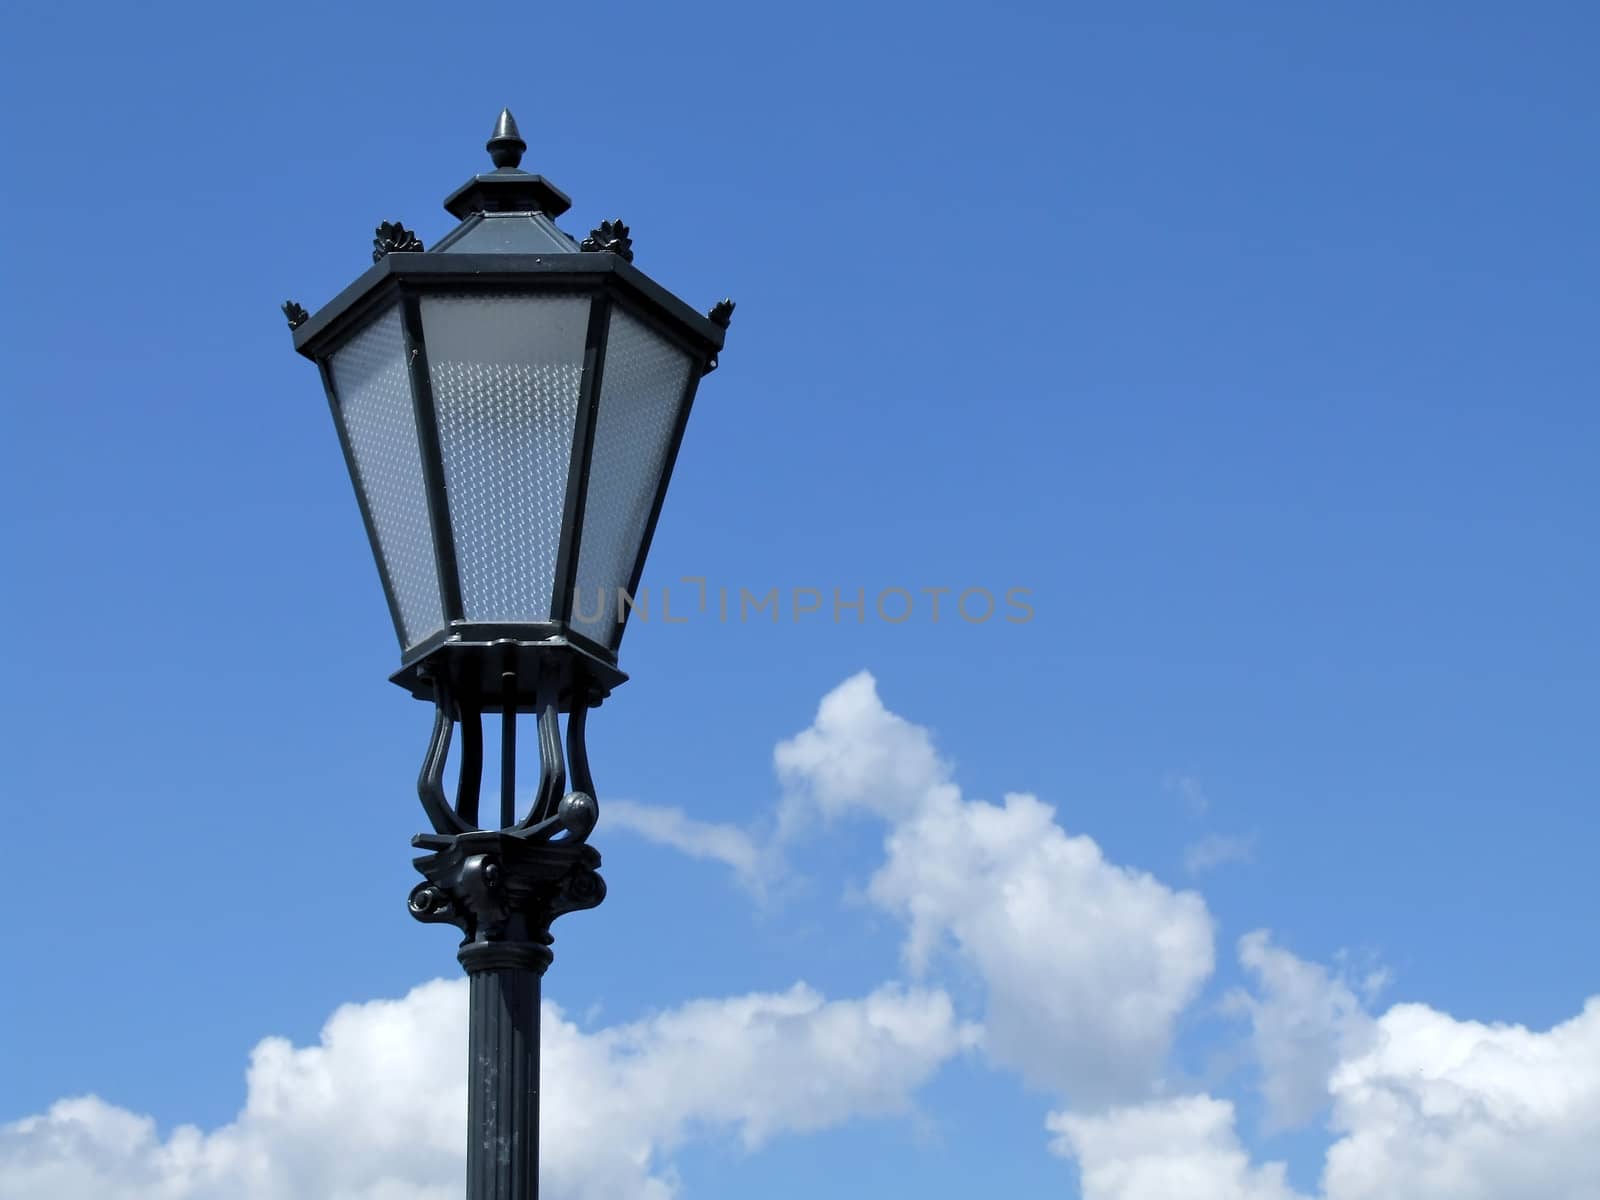 the street lamp on the street by anki21